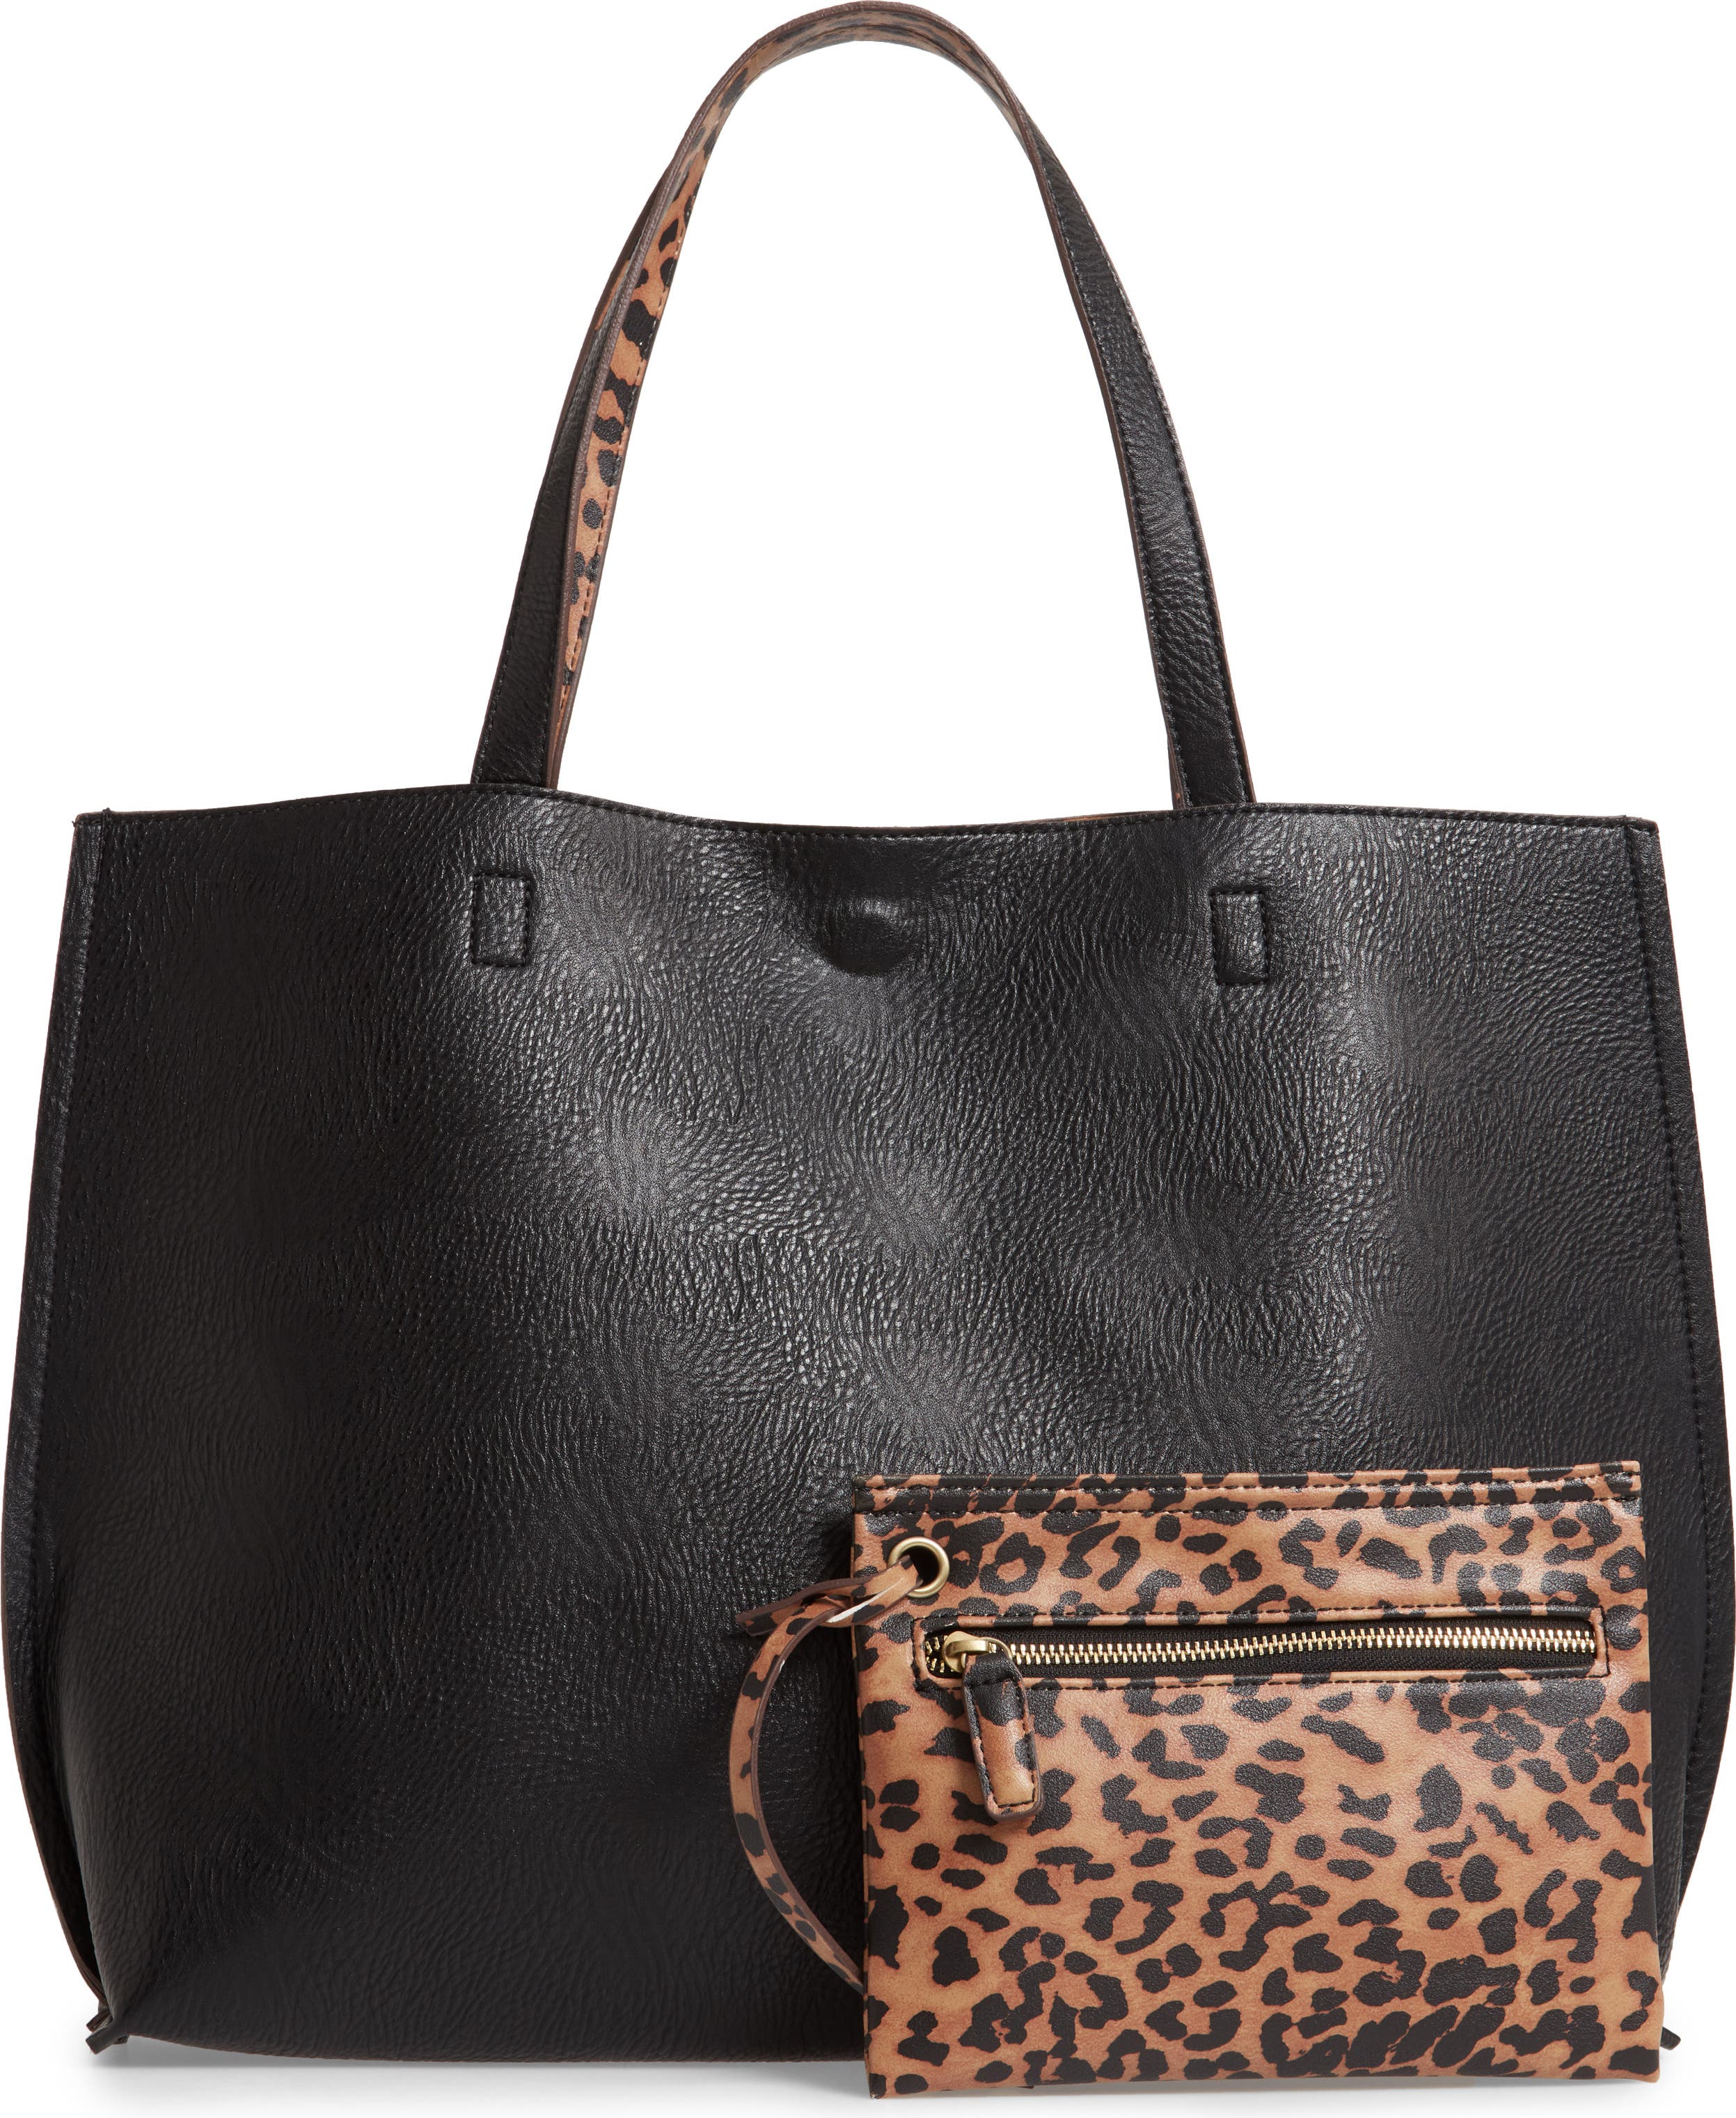 with Removable Zip Pouch & Shoulder Strap Faux Leather Brown Tote Bag